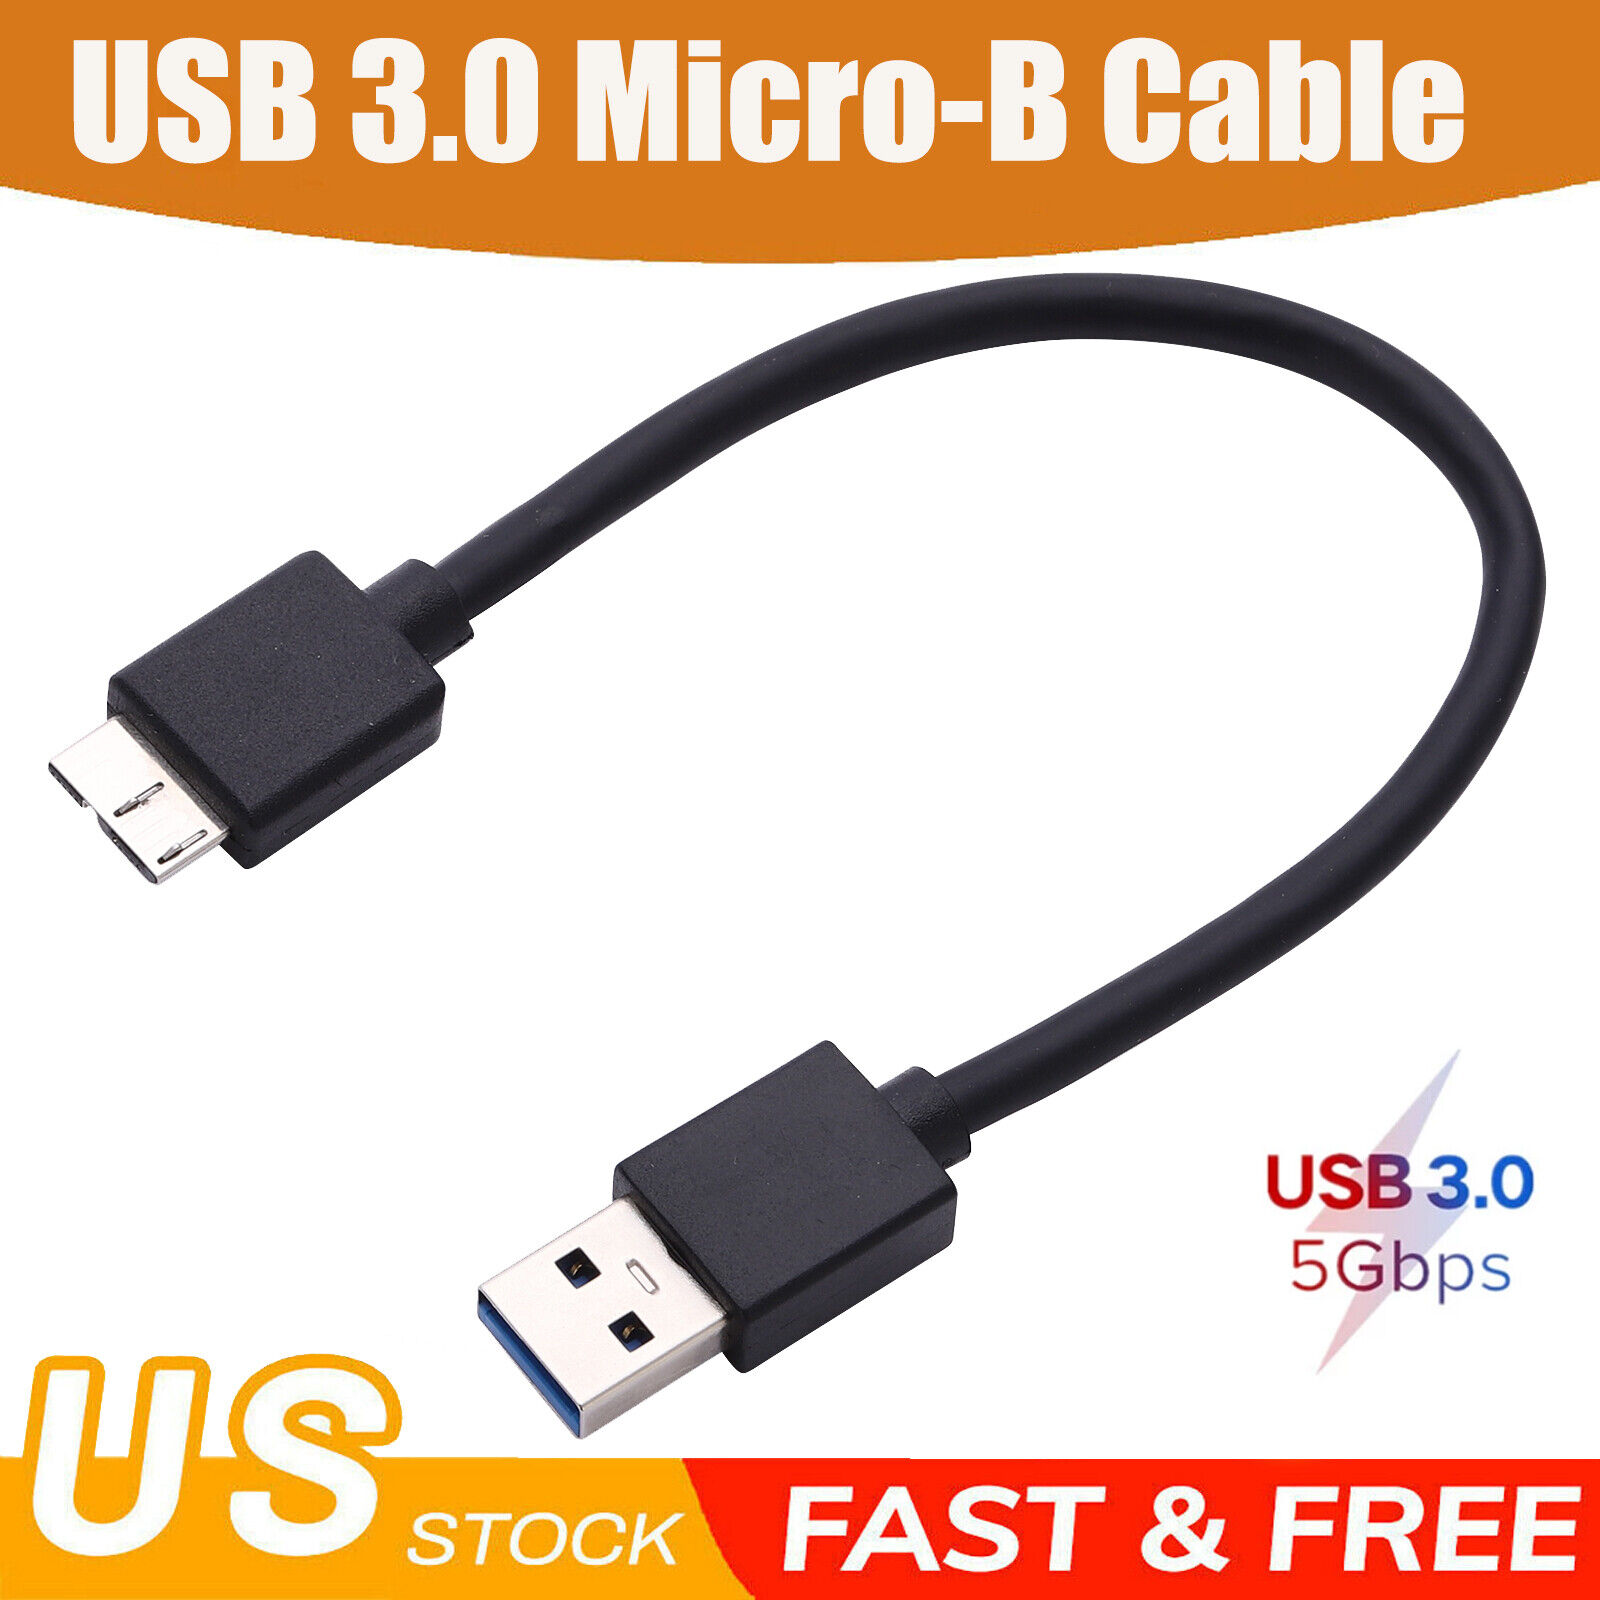 USB 3.0 Cord Cable For SEAGATE Backup Plus Slim Portable External Hard Drive HDD